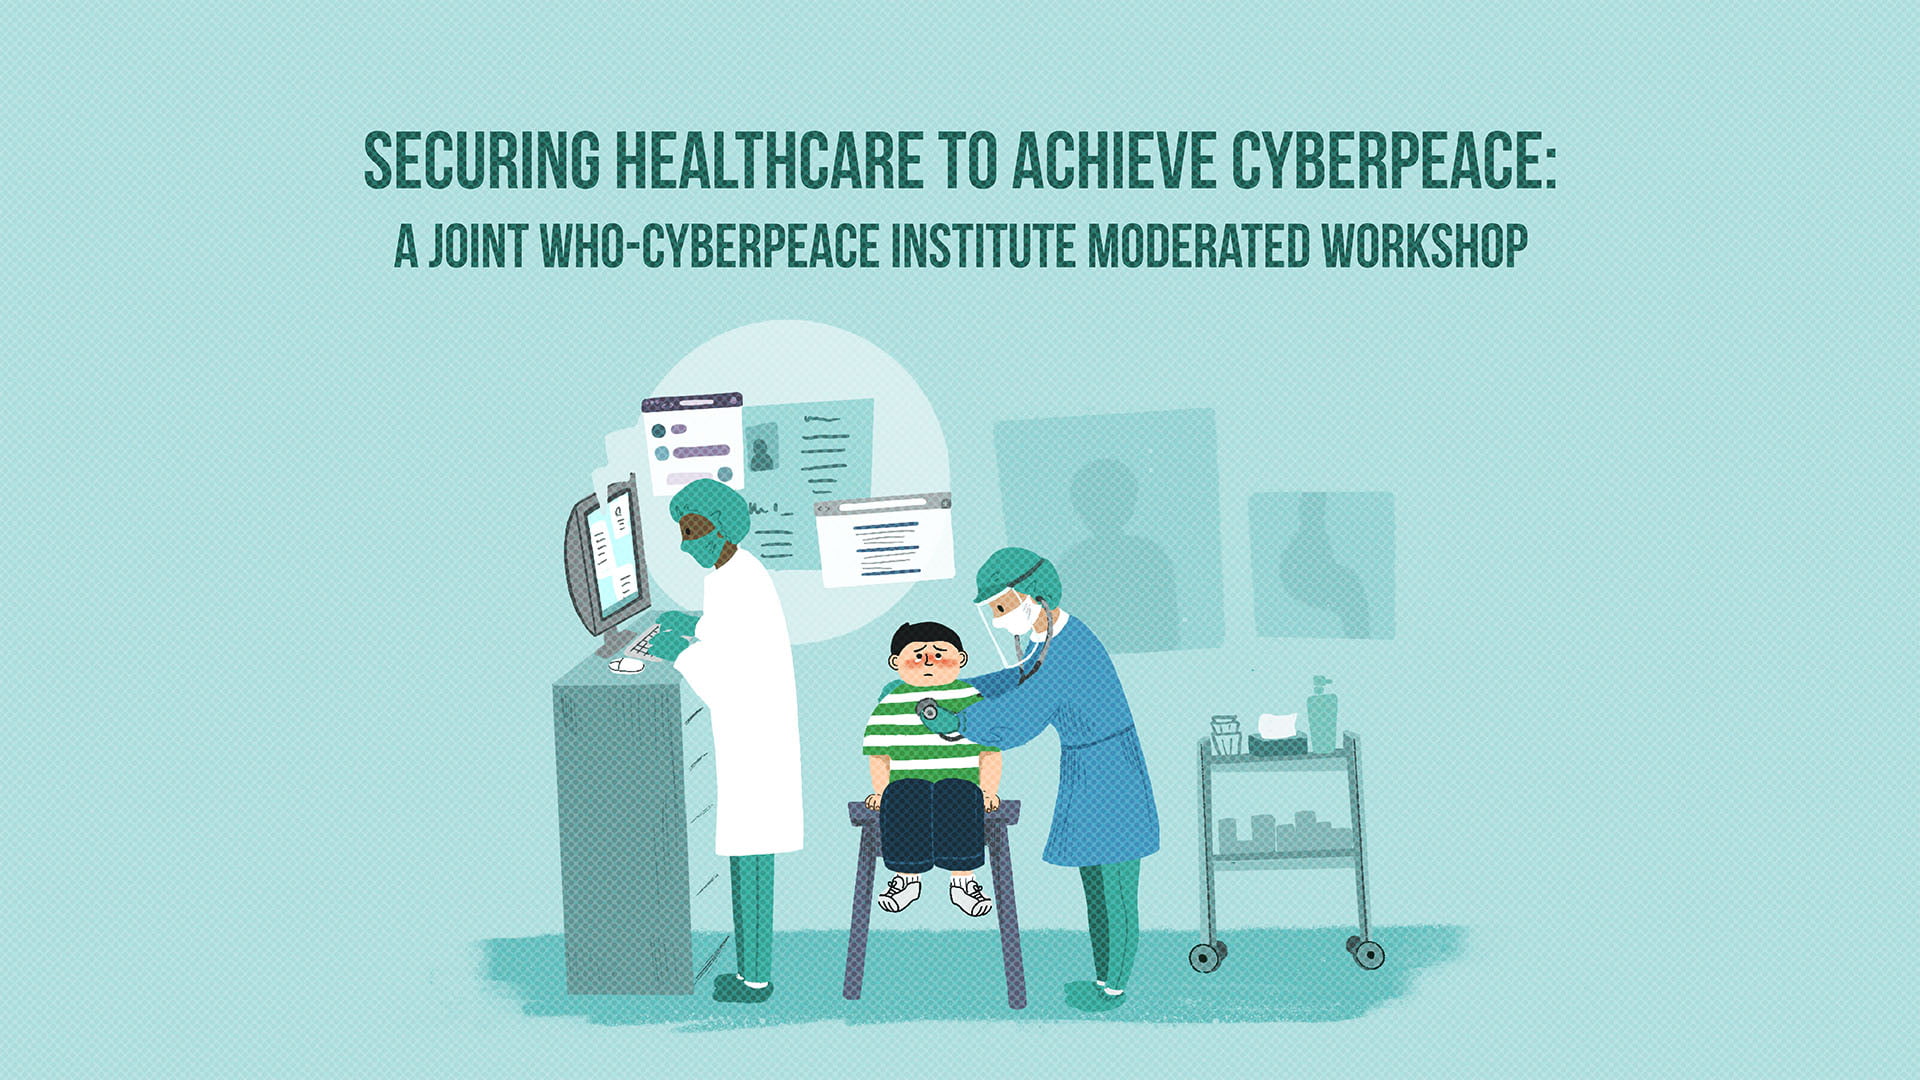 Securing Healthcare to Achieve Cyberpeace